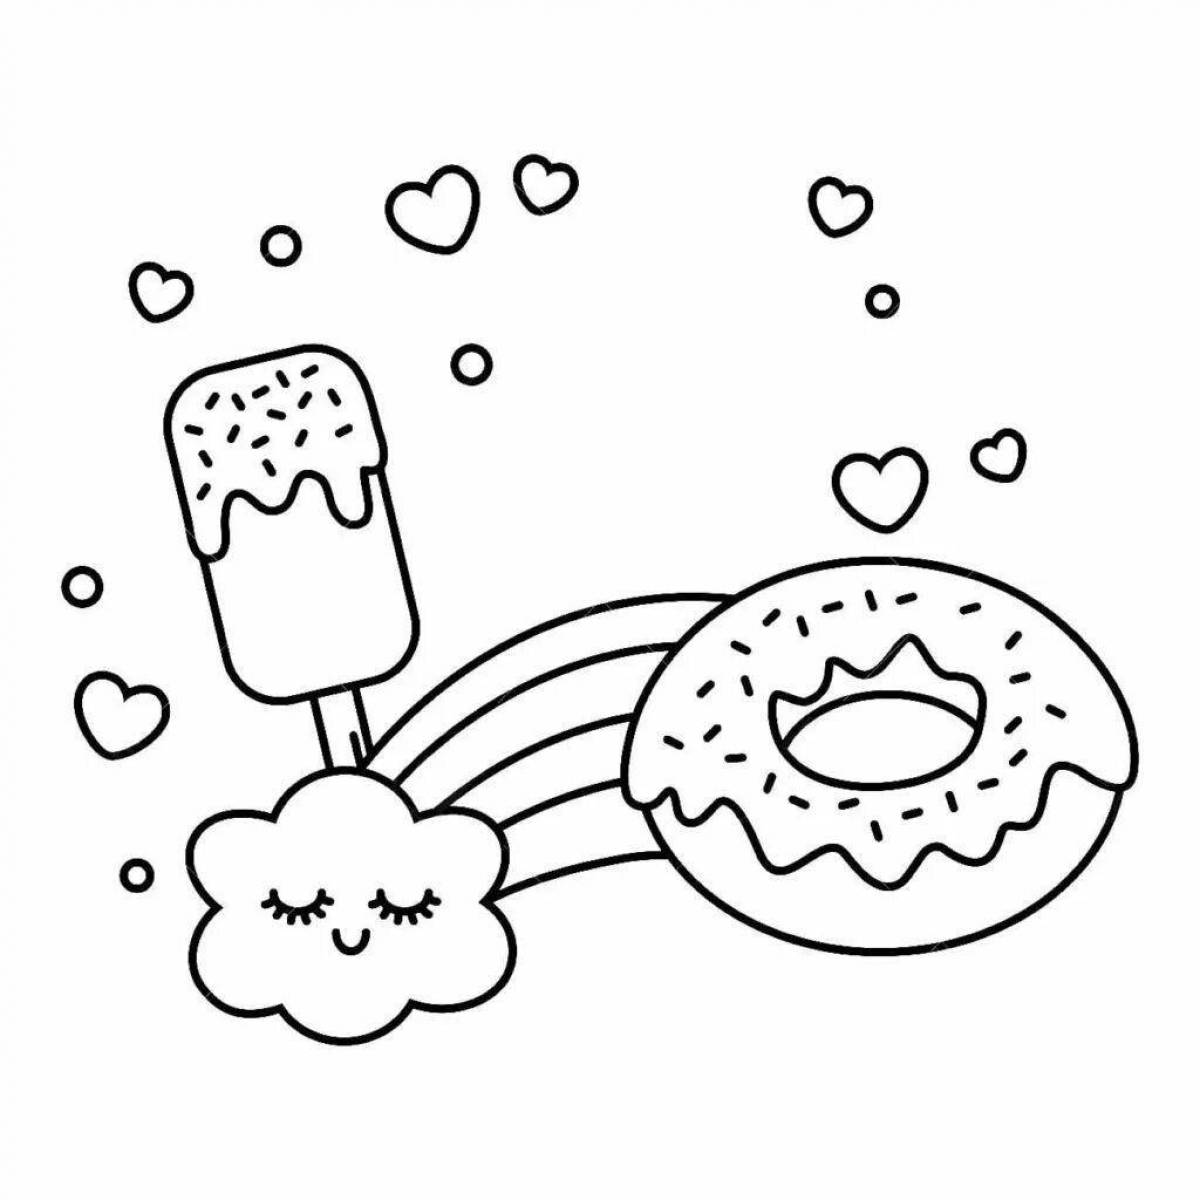 Adorable donut coloring page for girls